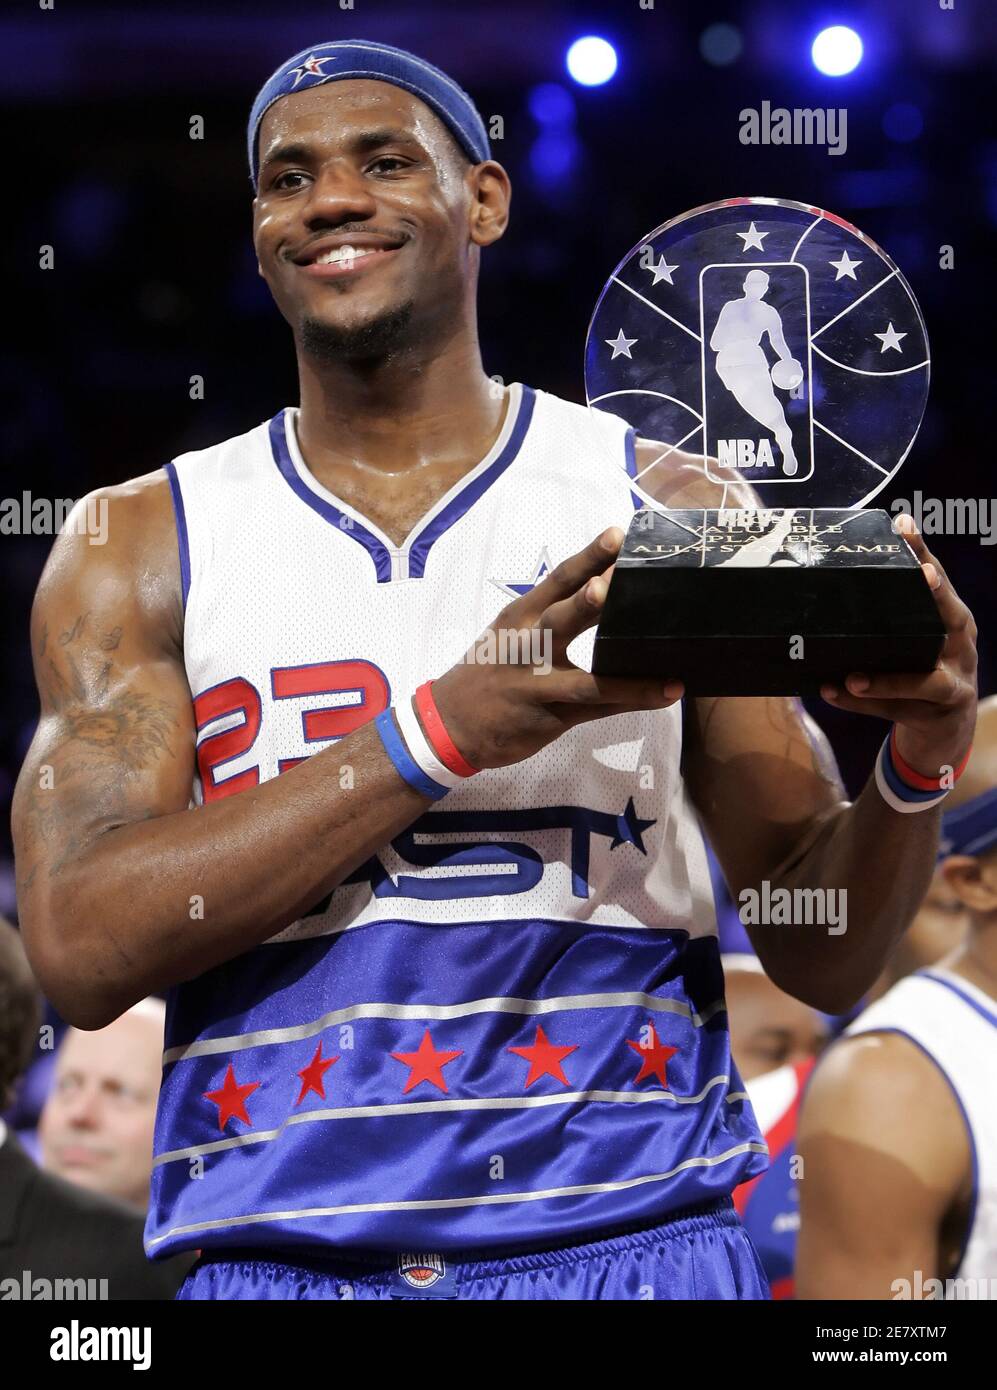 Eastern Conference forward LeBron James holds the Most Valuable Player  trophy at the 55th NBA All-Star Game in Houston, Texas February 19, 2006.  The East defeated the Western Conference 122-120. REUTERS/John Gress